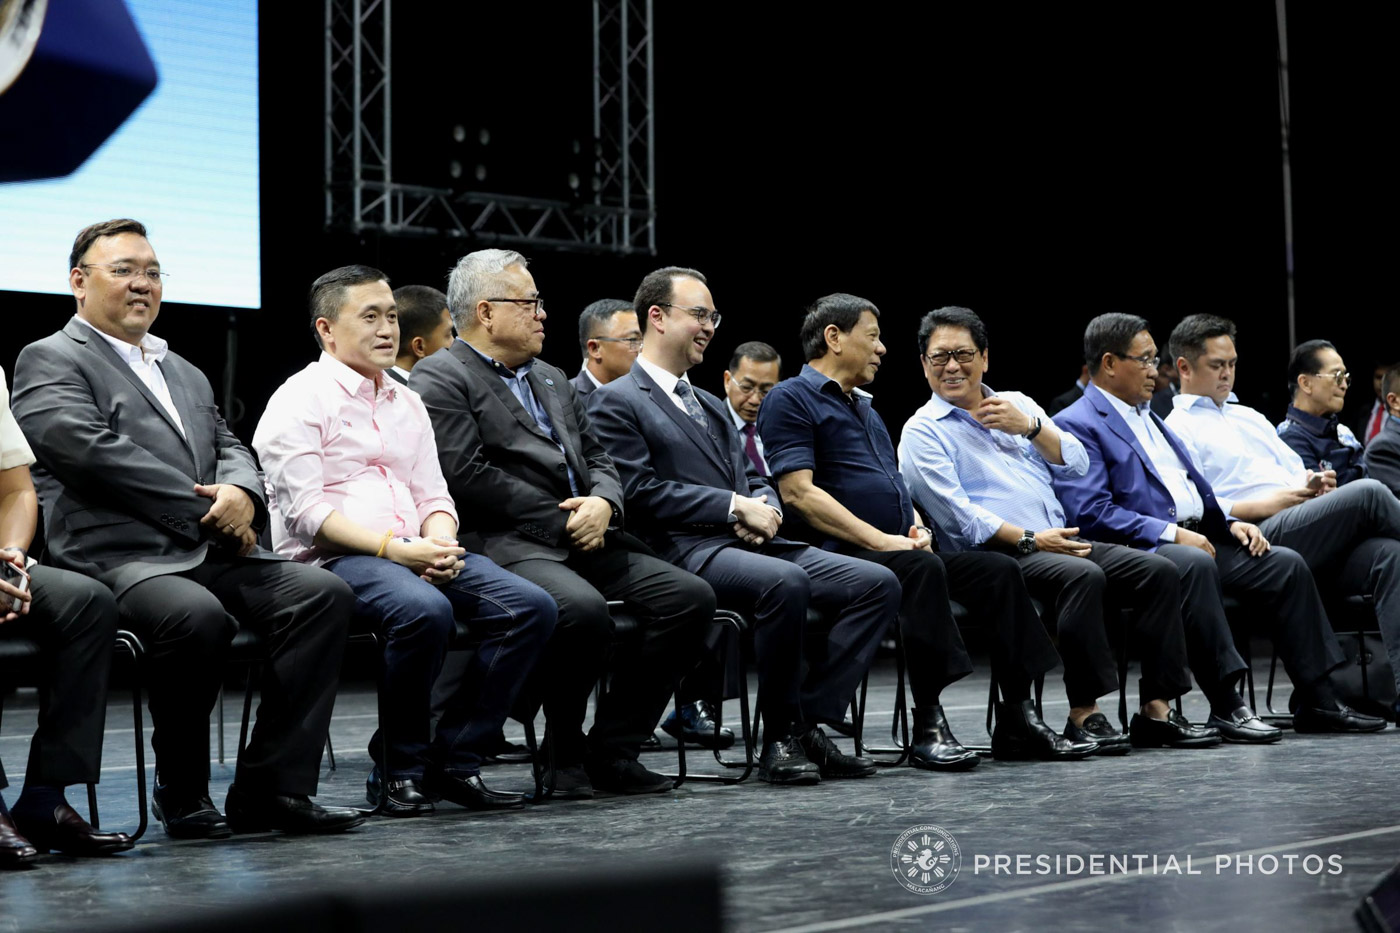 ONSTAGE. President Rodrigo Duterte (5th from left) is seated between Foreign Affairs Secretary Alan Peter Cayetano and Labor Secretary Silvestre Bello III. Photo by Robinson Niñal Jr/Presidential Photo 